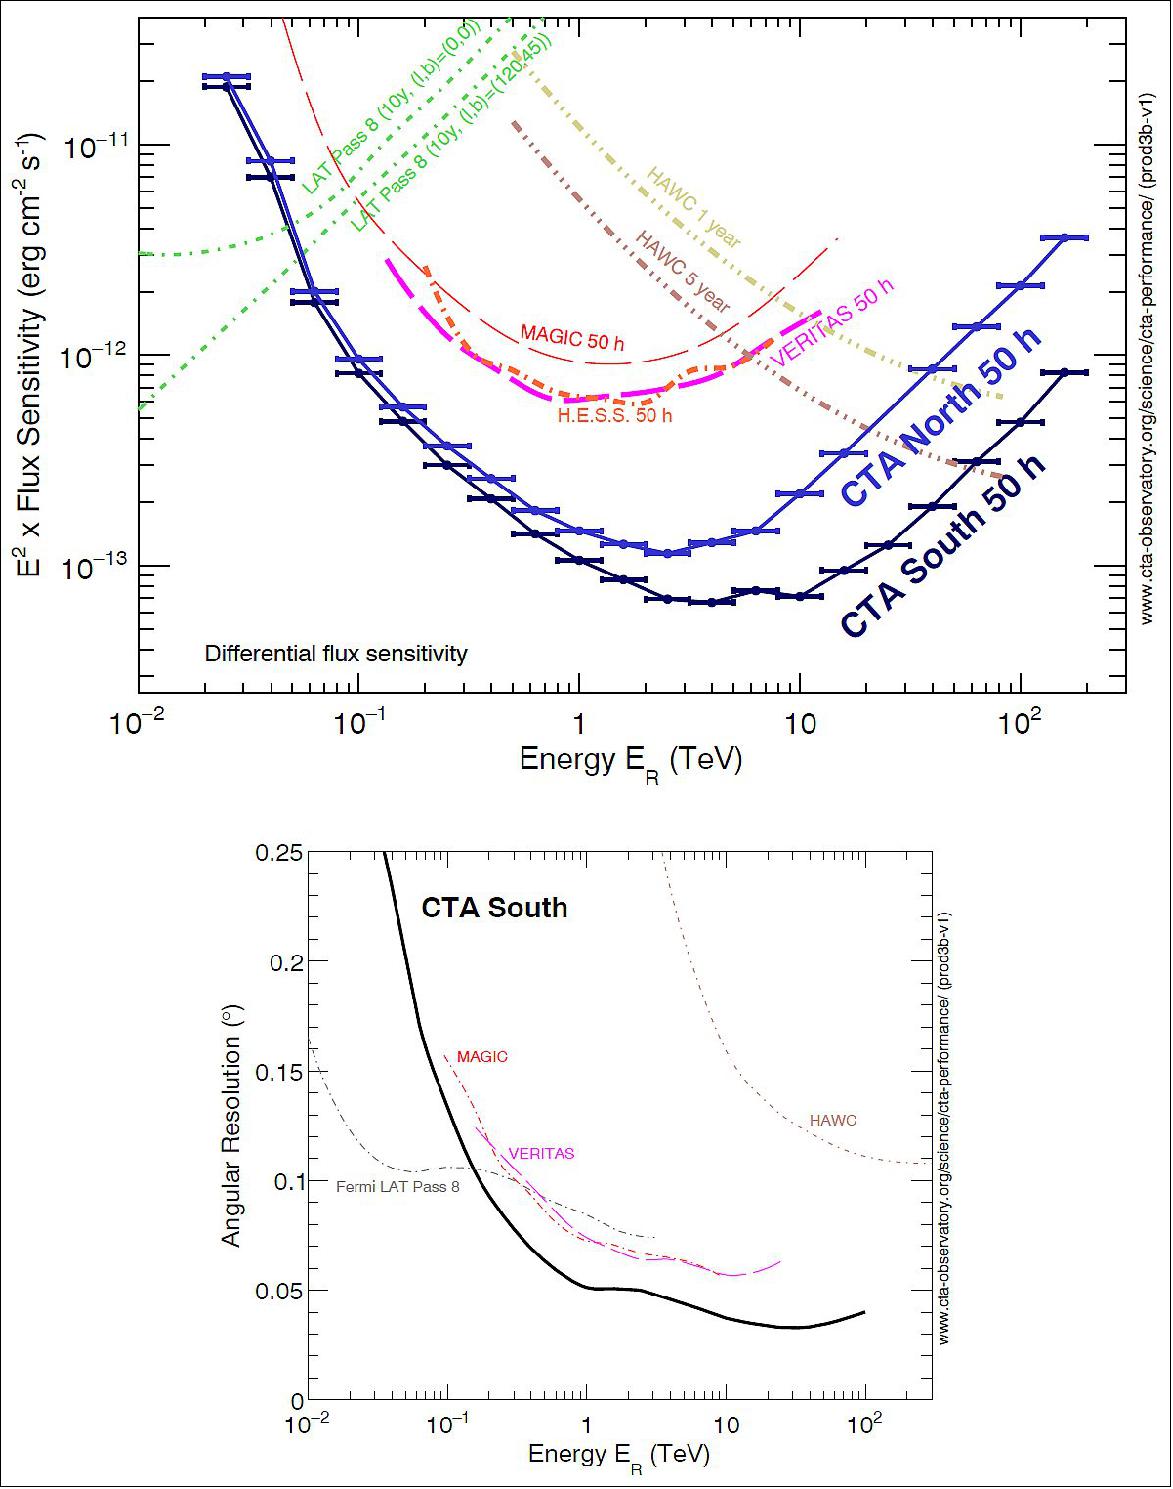 Figure 1: Comparisons of the performance of CTA with selected existing gamma-ray instruments. Top: differential energy flux sensitivities for CTA (south and north) for five standard deviation detections in five independent logarithmic bins per decade in energy. For the CTA sensitivities, additional criteria are applied to require at least ten detected gamma rays per energy bin and a signal/background ratio of at least 1/20. The curves for Fermi-LAT (Fermi- Large Area Telescope) and HAWC (High Altitude Water Cherenkov) Experiment are scaled by a factor of 1.2 to account for the different energy binning. The curves shown give only an indicative comparison of the sensitivity of the different instruments, as the method of calculation and the criteria applied are different. In particular, the definition of the differential sensitivity for HAWC is rather different due to the lack of energy reconstruction for individual photons in the HAWC analysis. — Bottom: angular resolution expressed as the 68% containment radius of reconstructed gamma rays (the resolution for CTA-North is similar). The sensitivity and angular resolution curves are based on the following references: Fermi-LAT [5)], HAWC [6)], H.E.S.S. [7)], MAGIC [8)], and VERITAS [9)]. The CTA curves represent the understanding of the performance of CTA at the time of completion of this document; for the latest CTA performance plots, see https://www.cta-observatory.org/science/cta-performance.